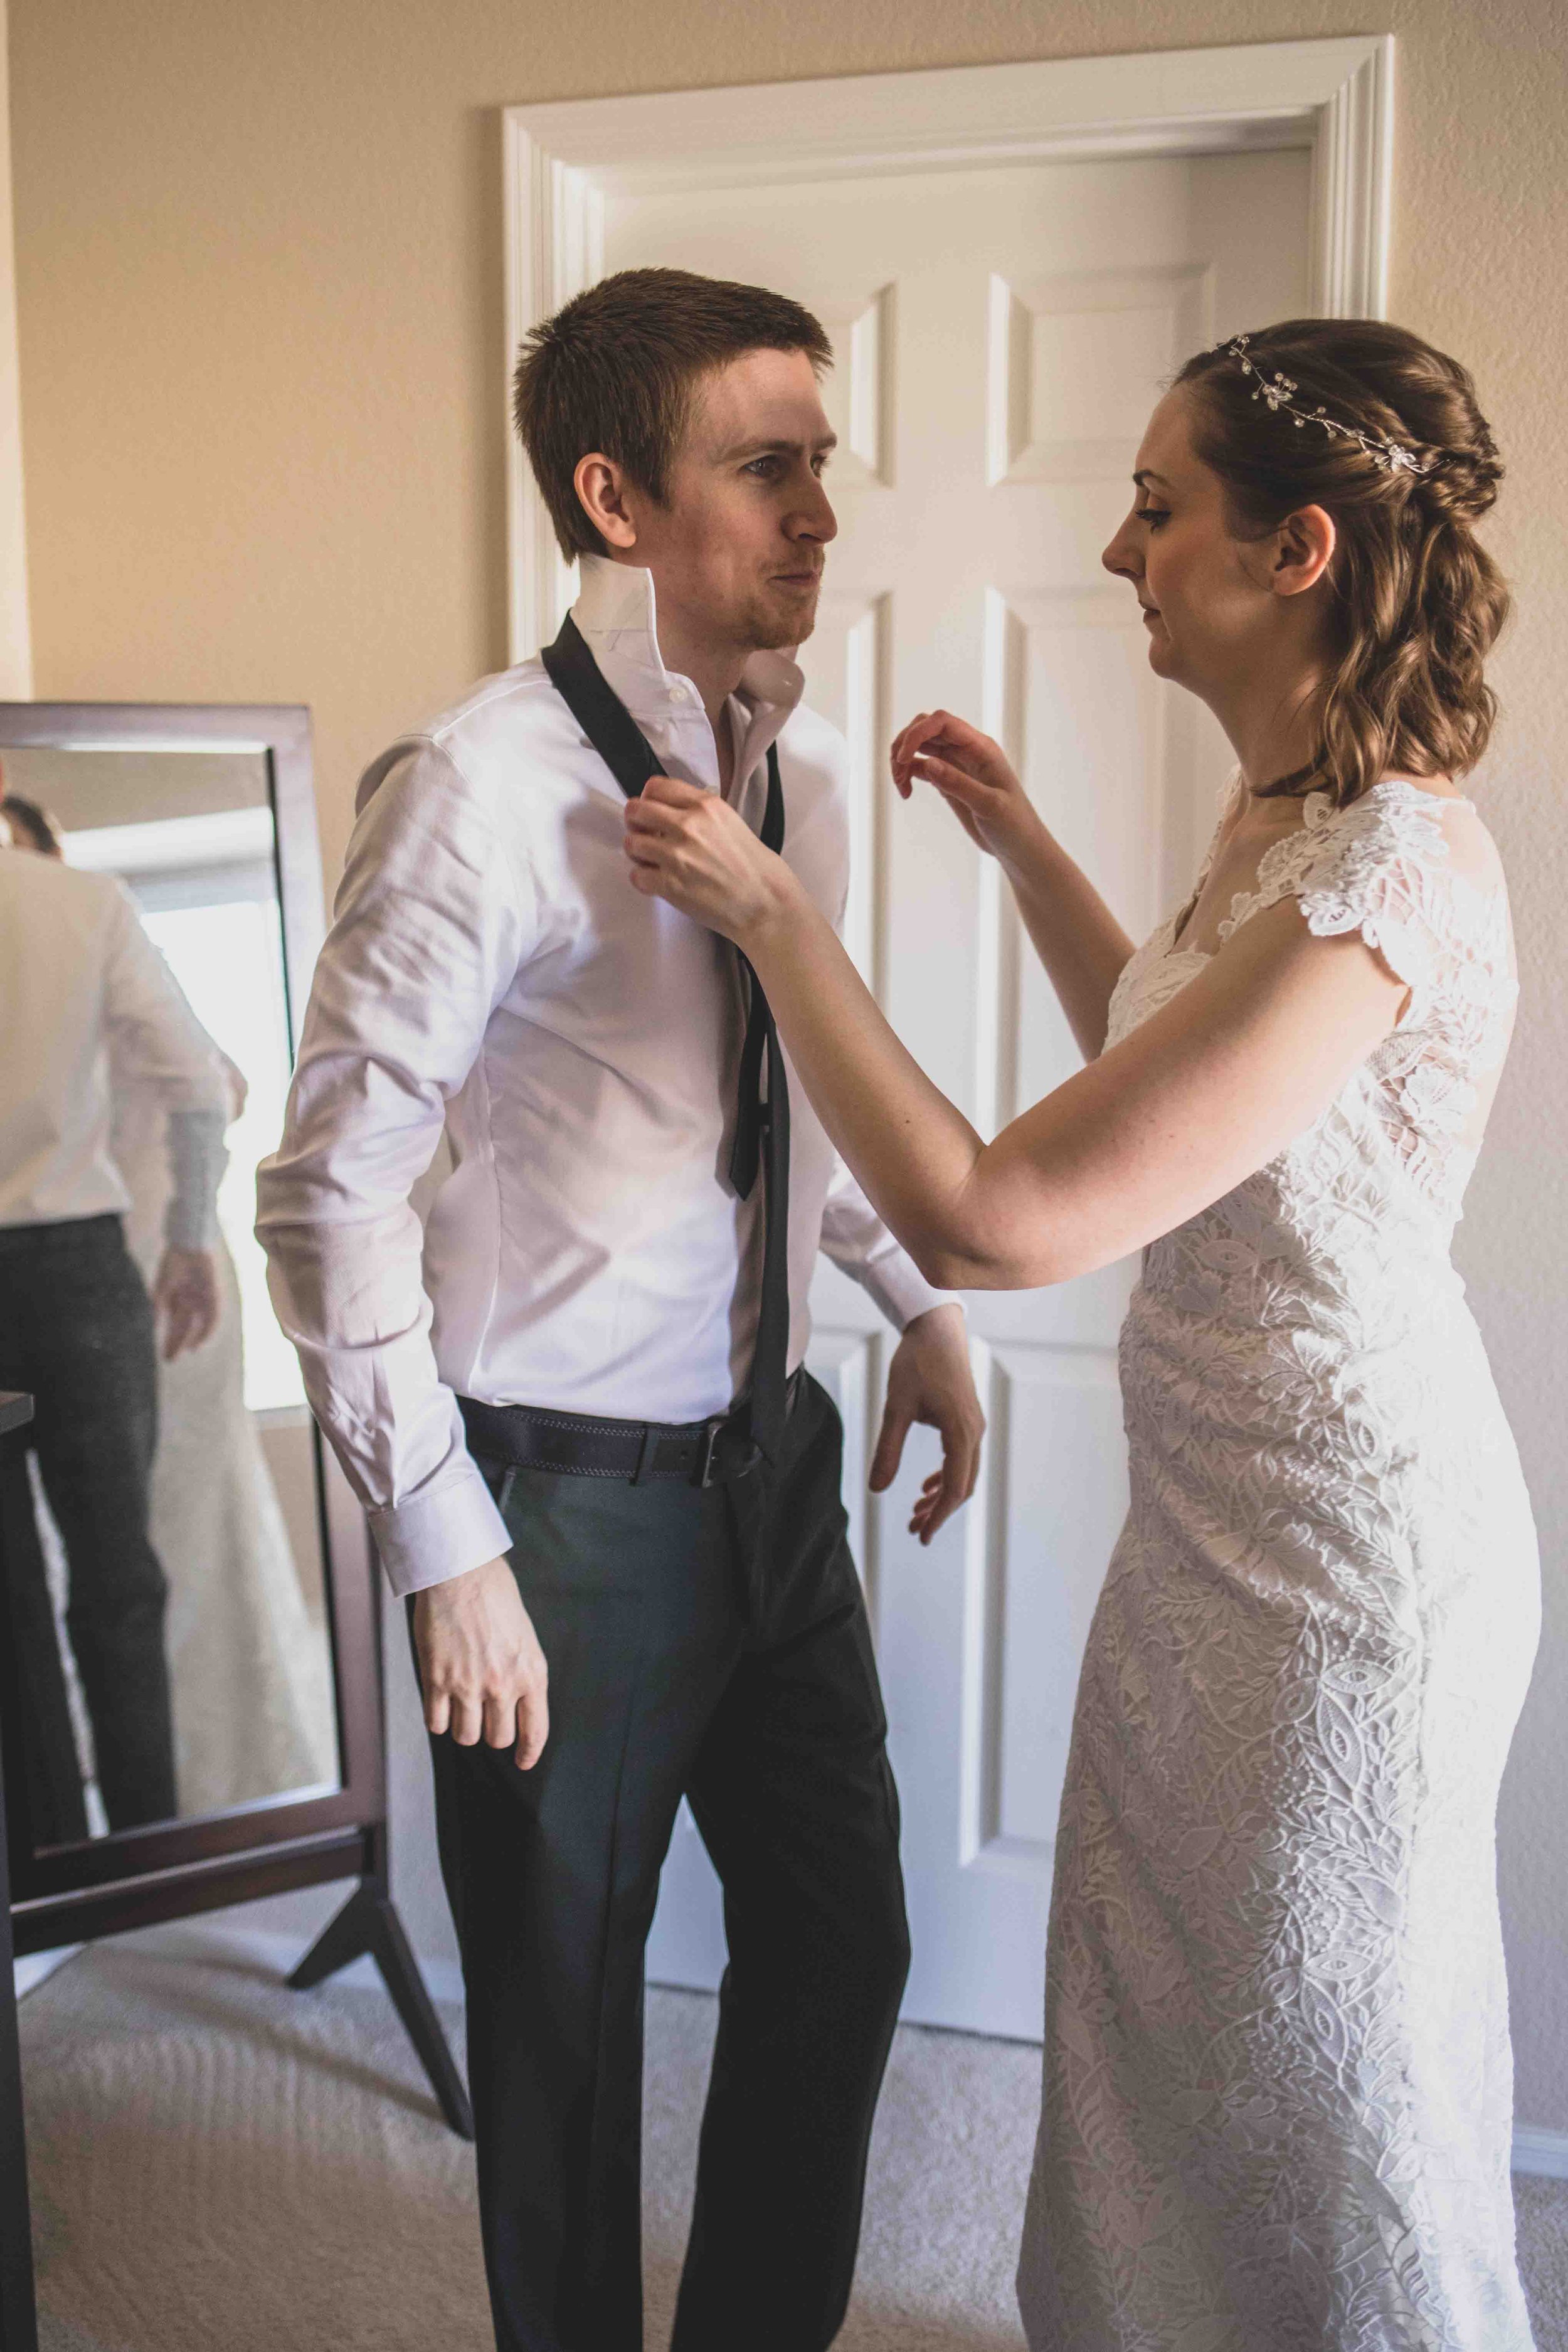 Bride and Groom getting ready together for their wedding day at home by Gilbert Wedding Photographer Jennifer Lind Schutsky.